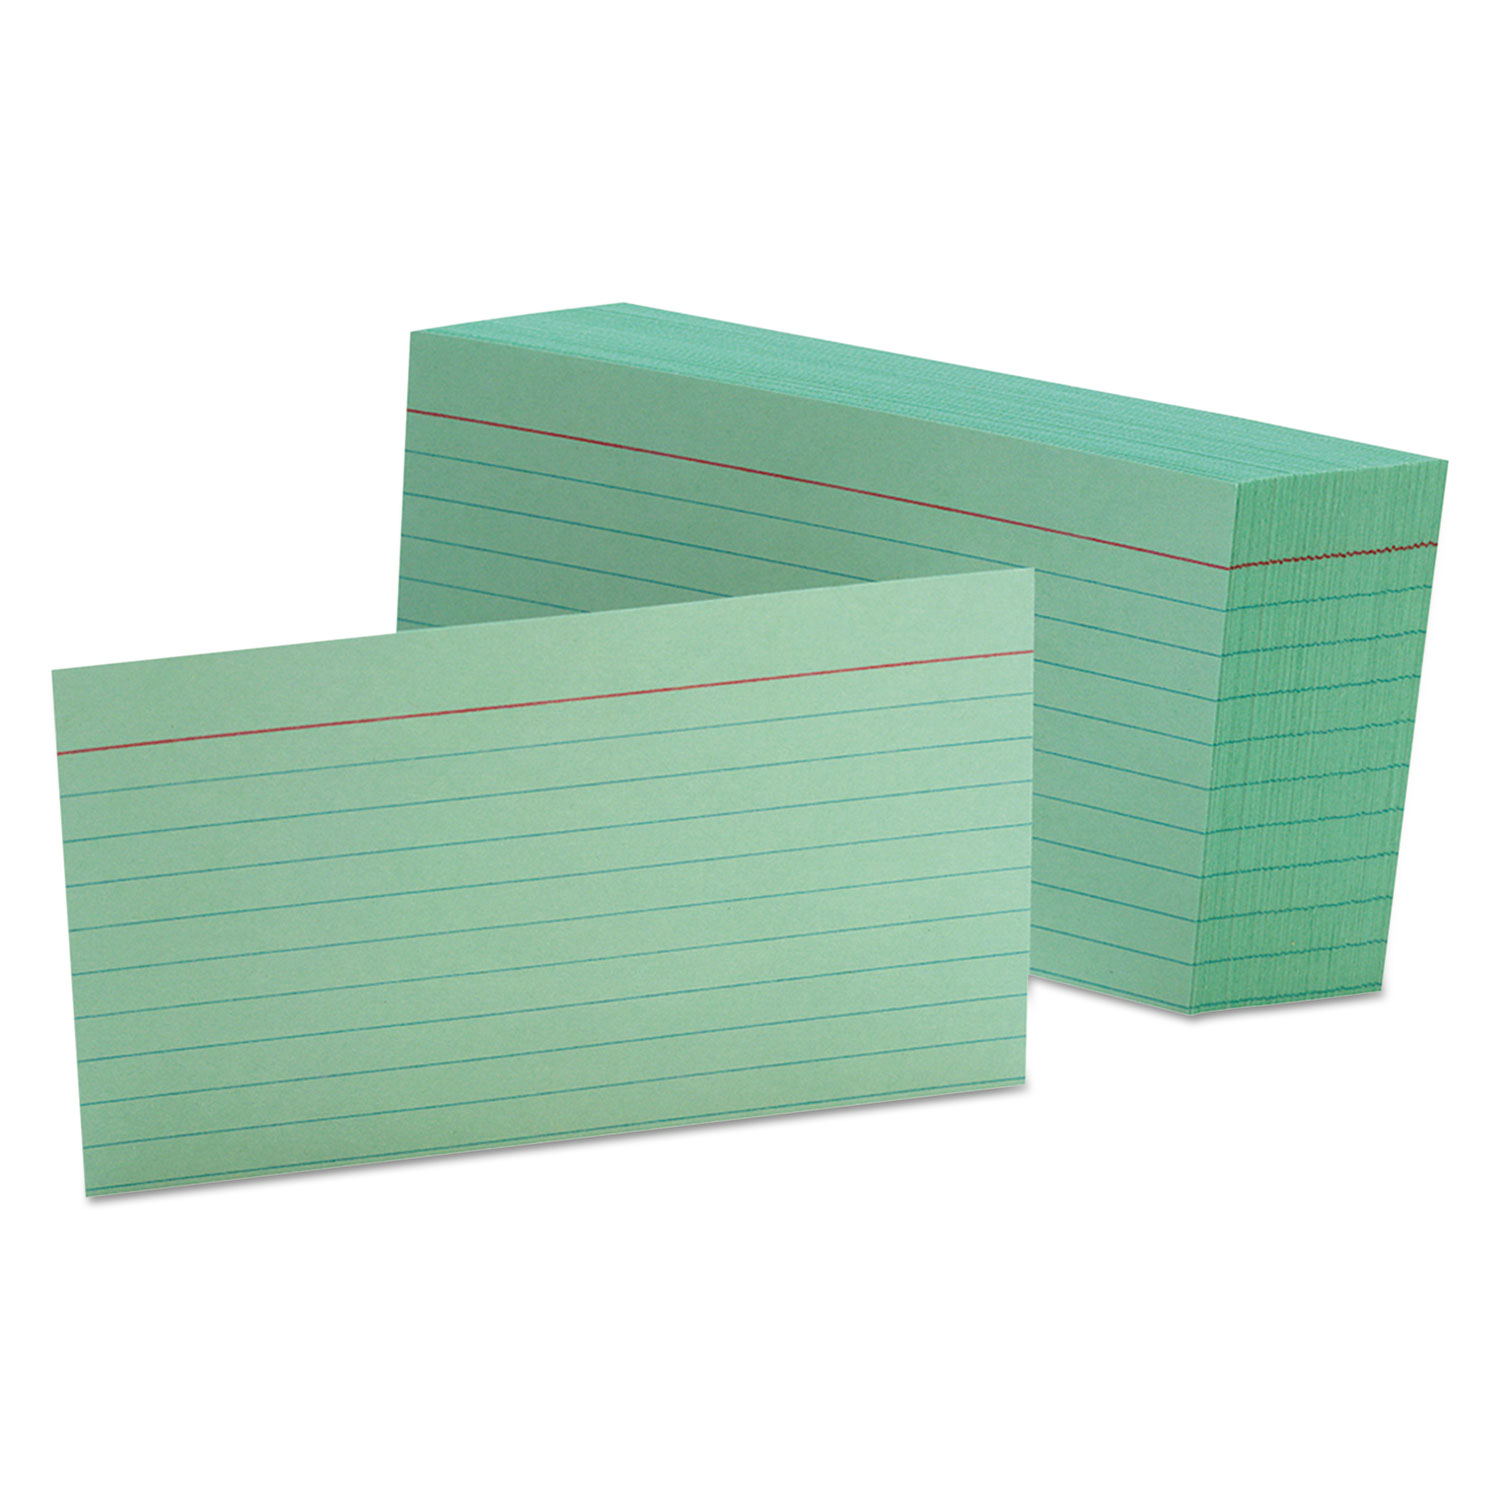 Ruled Index Cards, 3 x 5, Green, 100/Pack